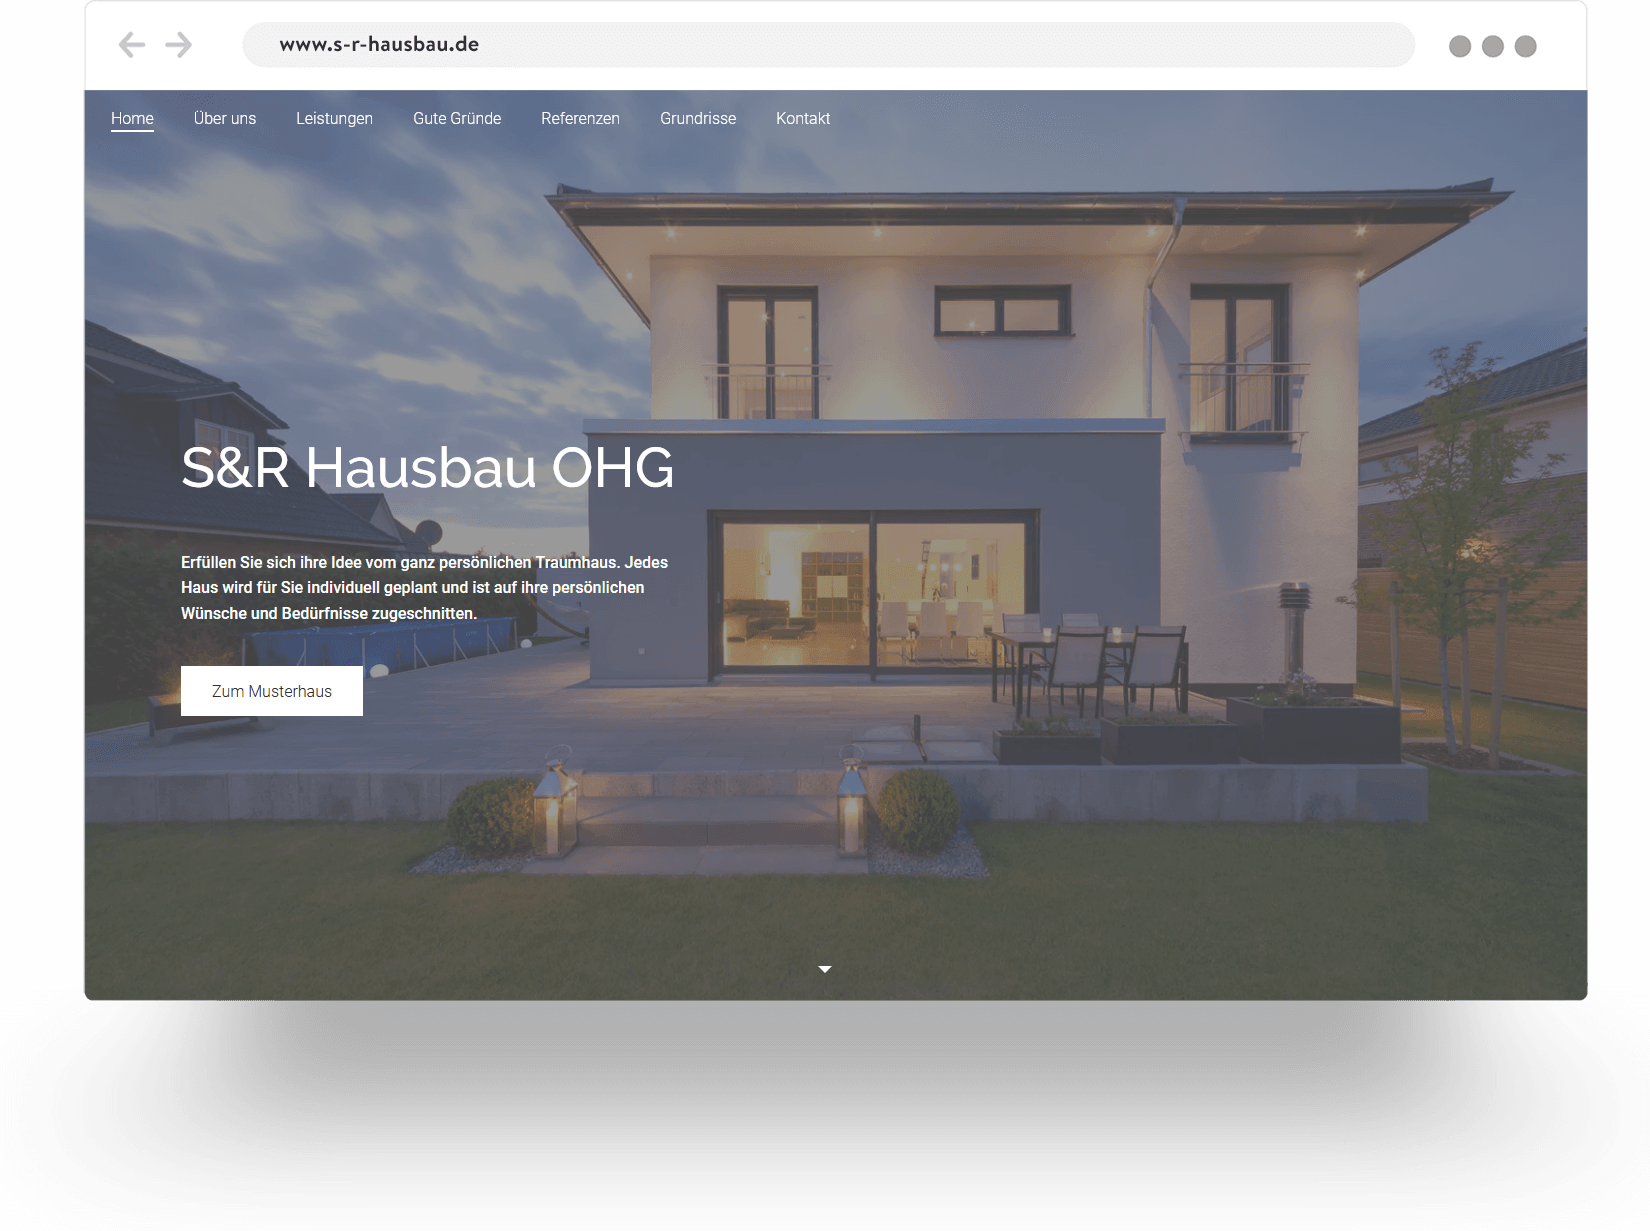 Example of a construction company website showing a contemporary showhome with large windows and outdoor decking